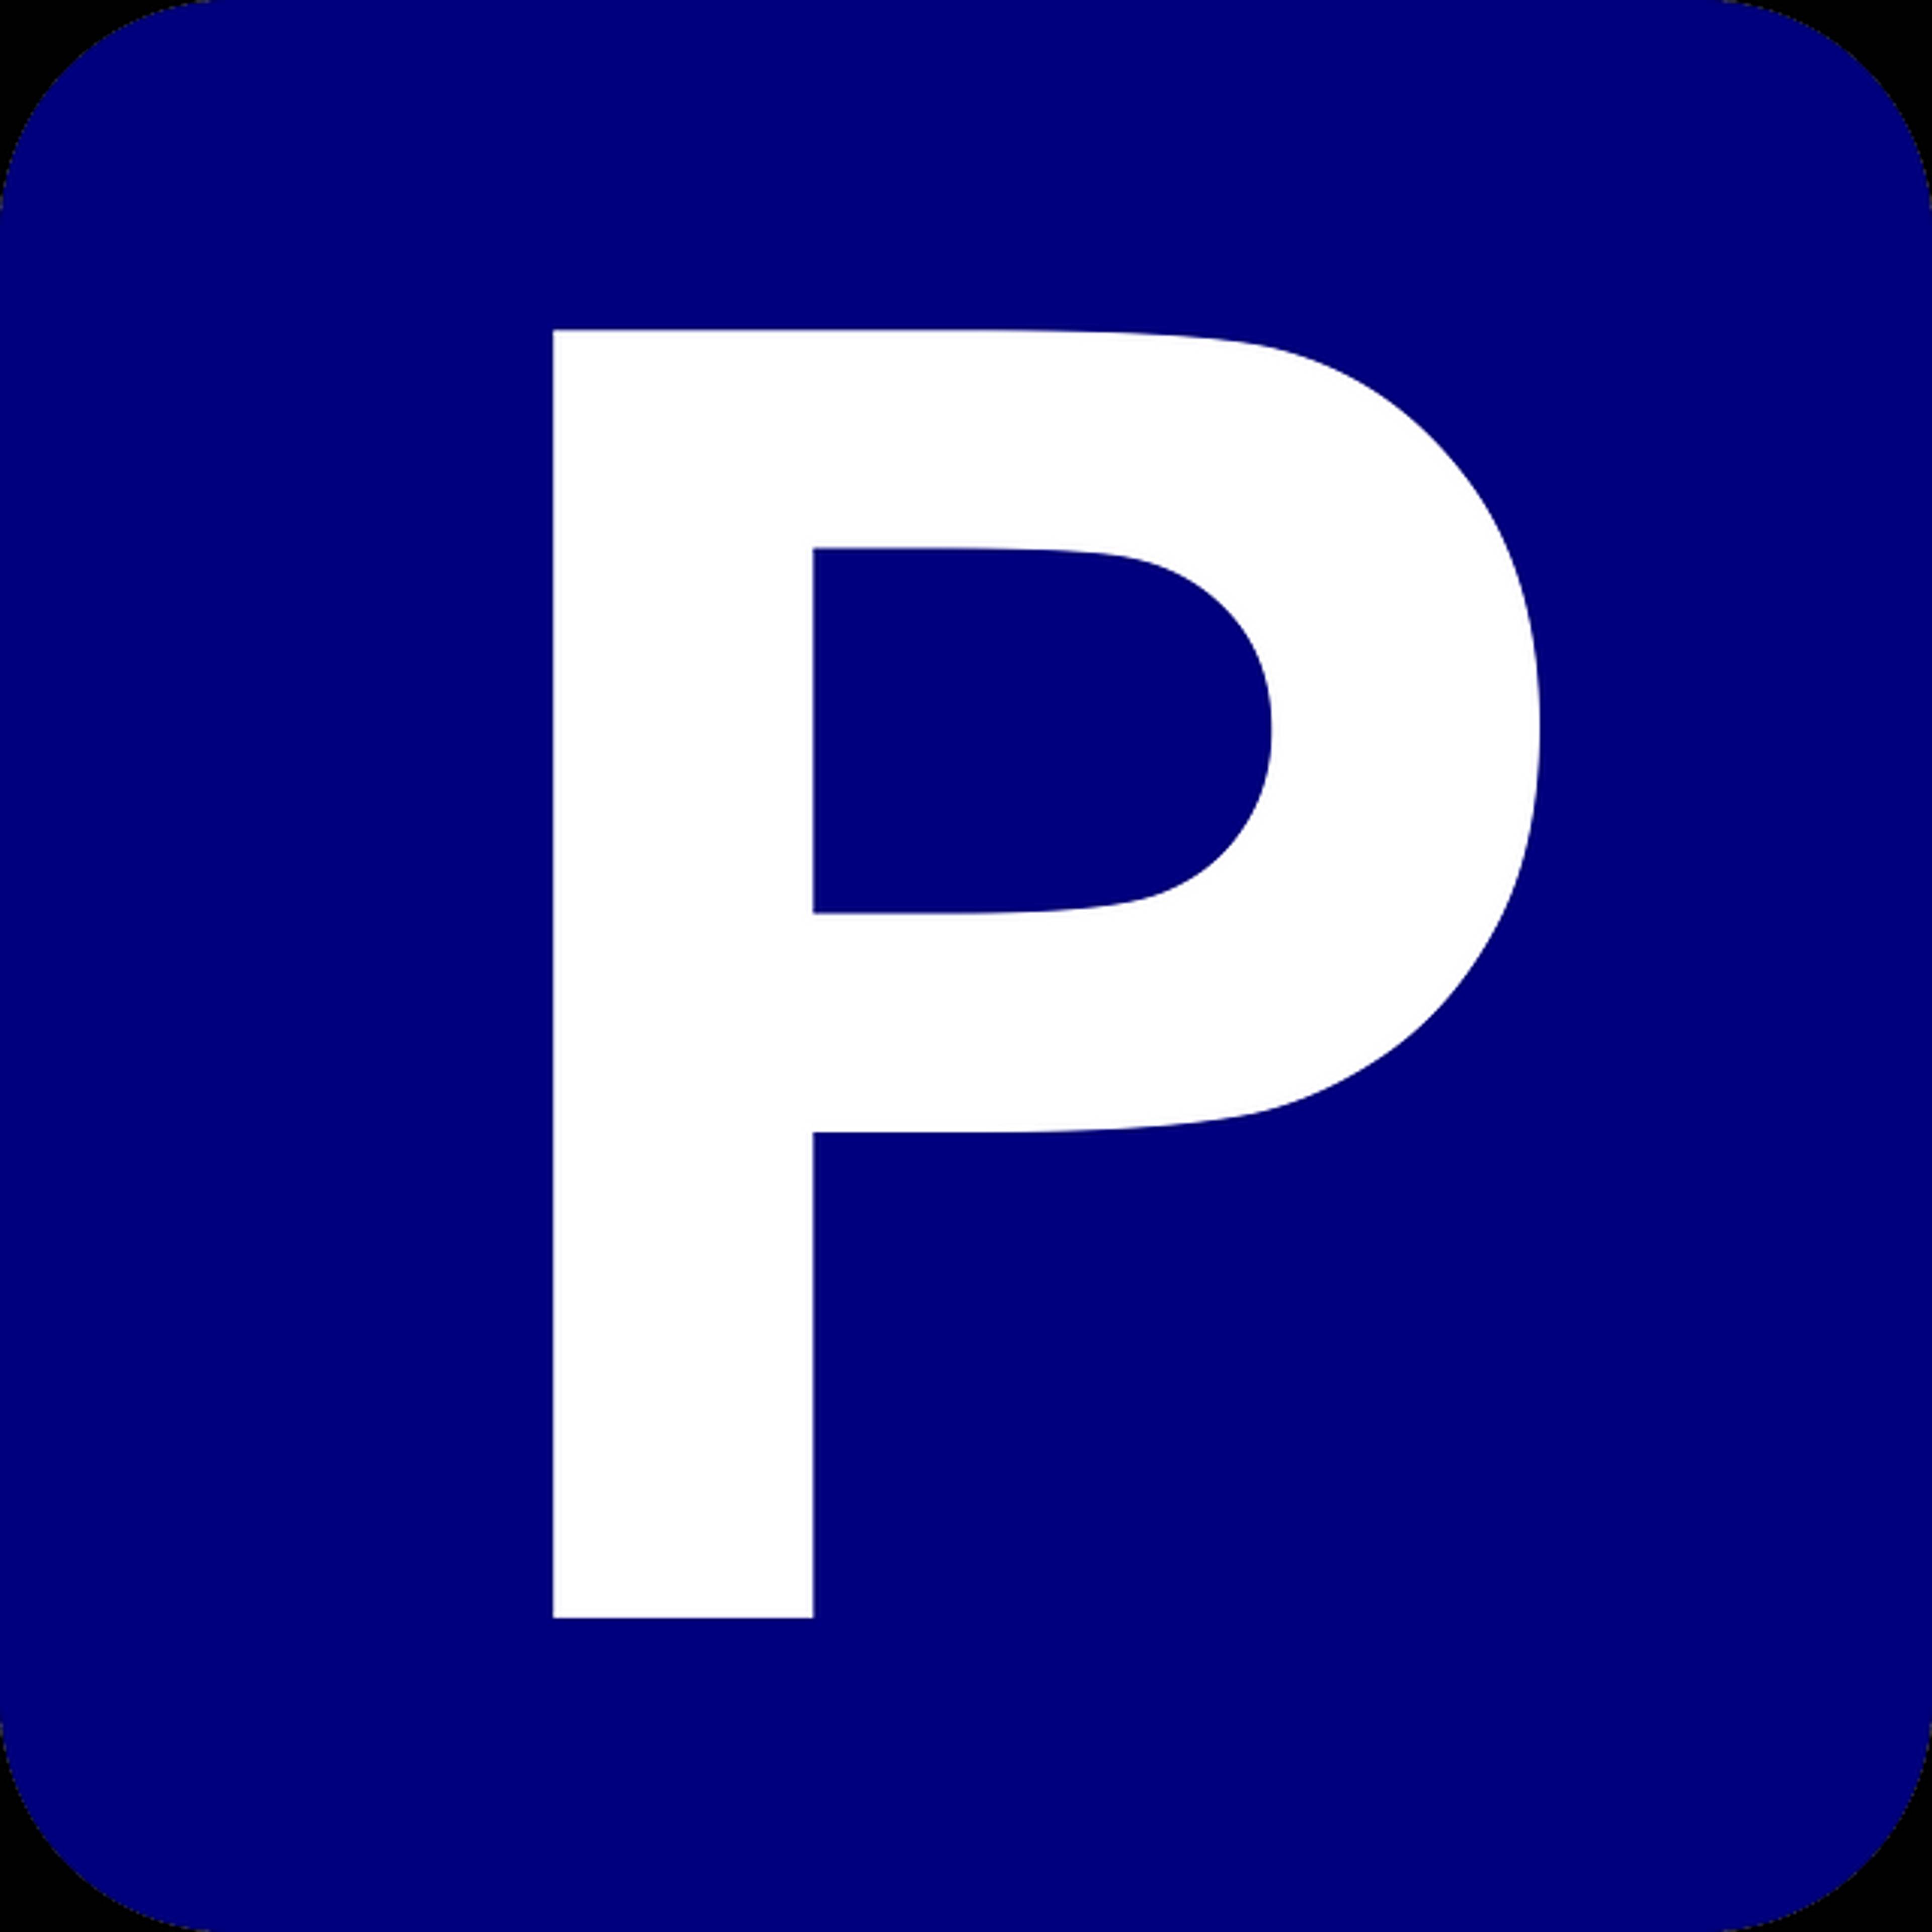 Covered parking